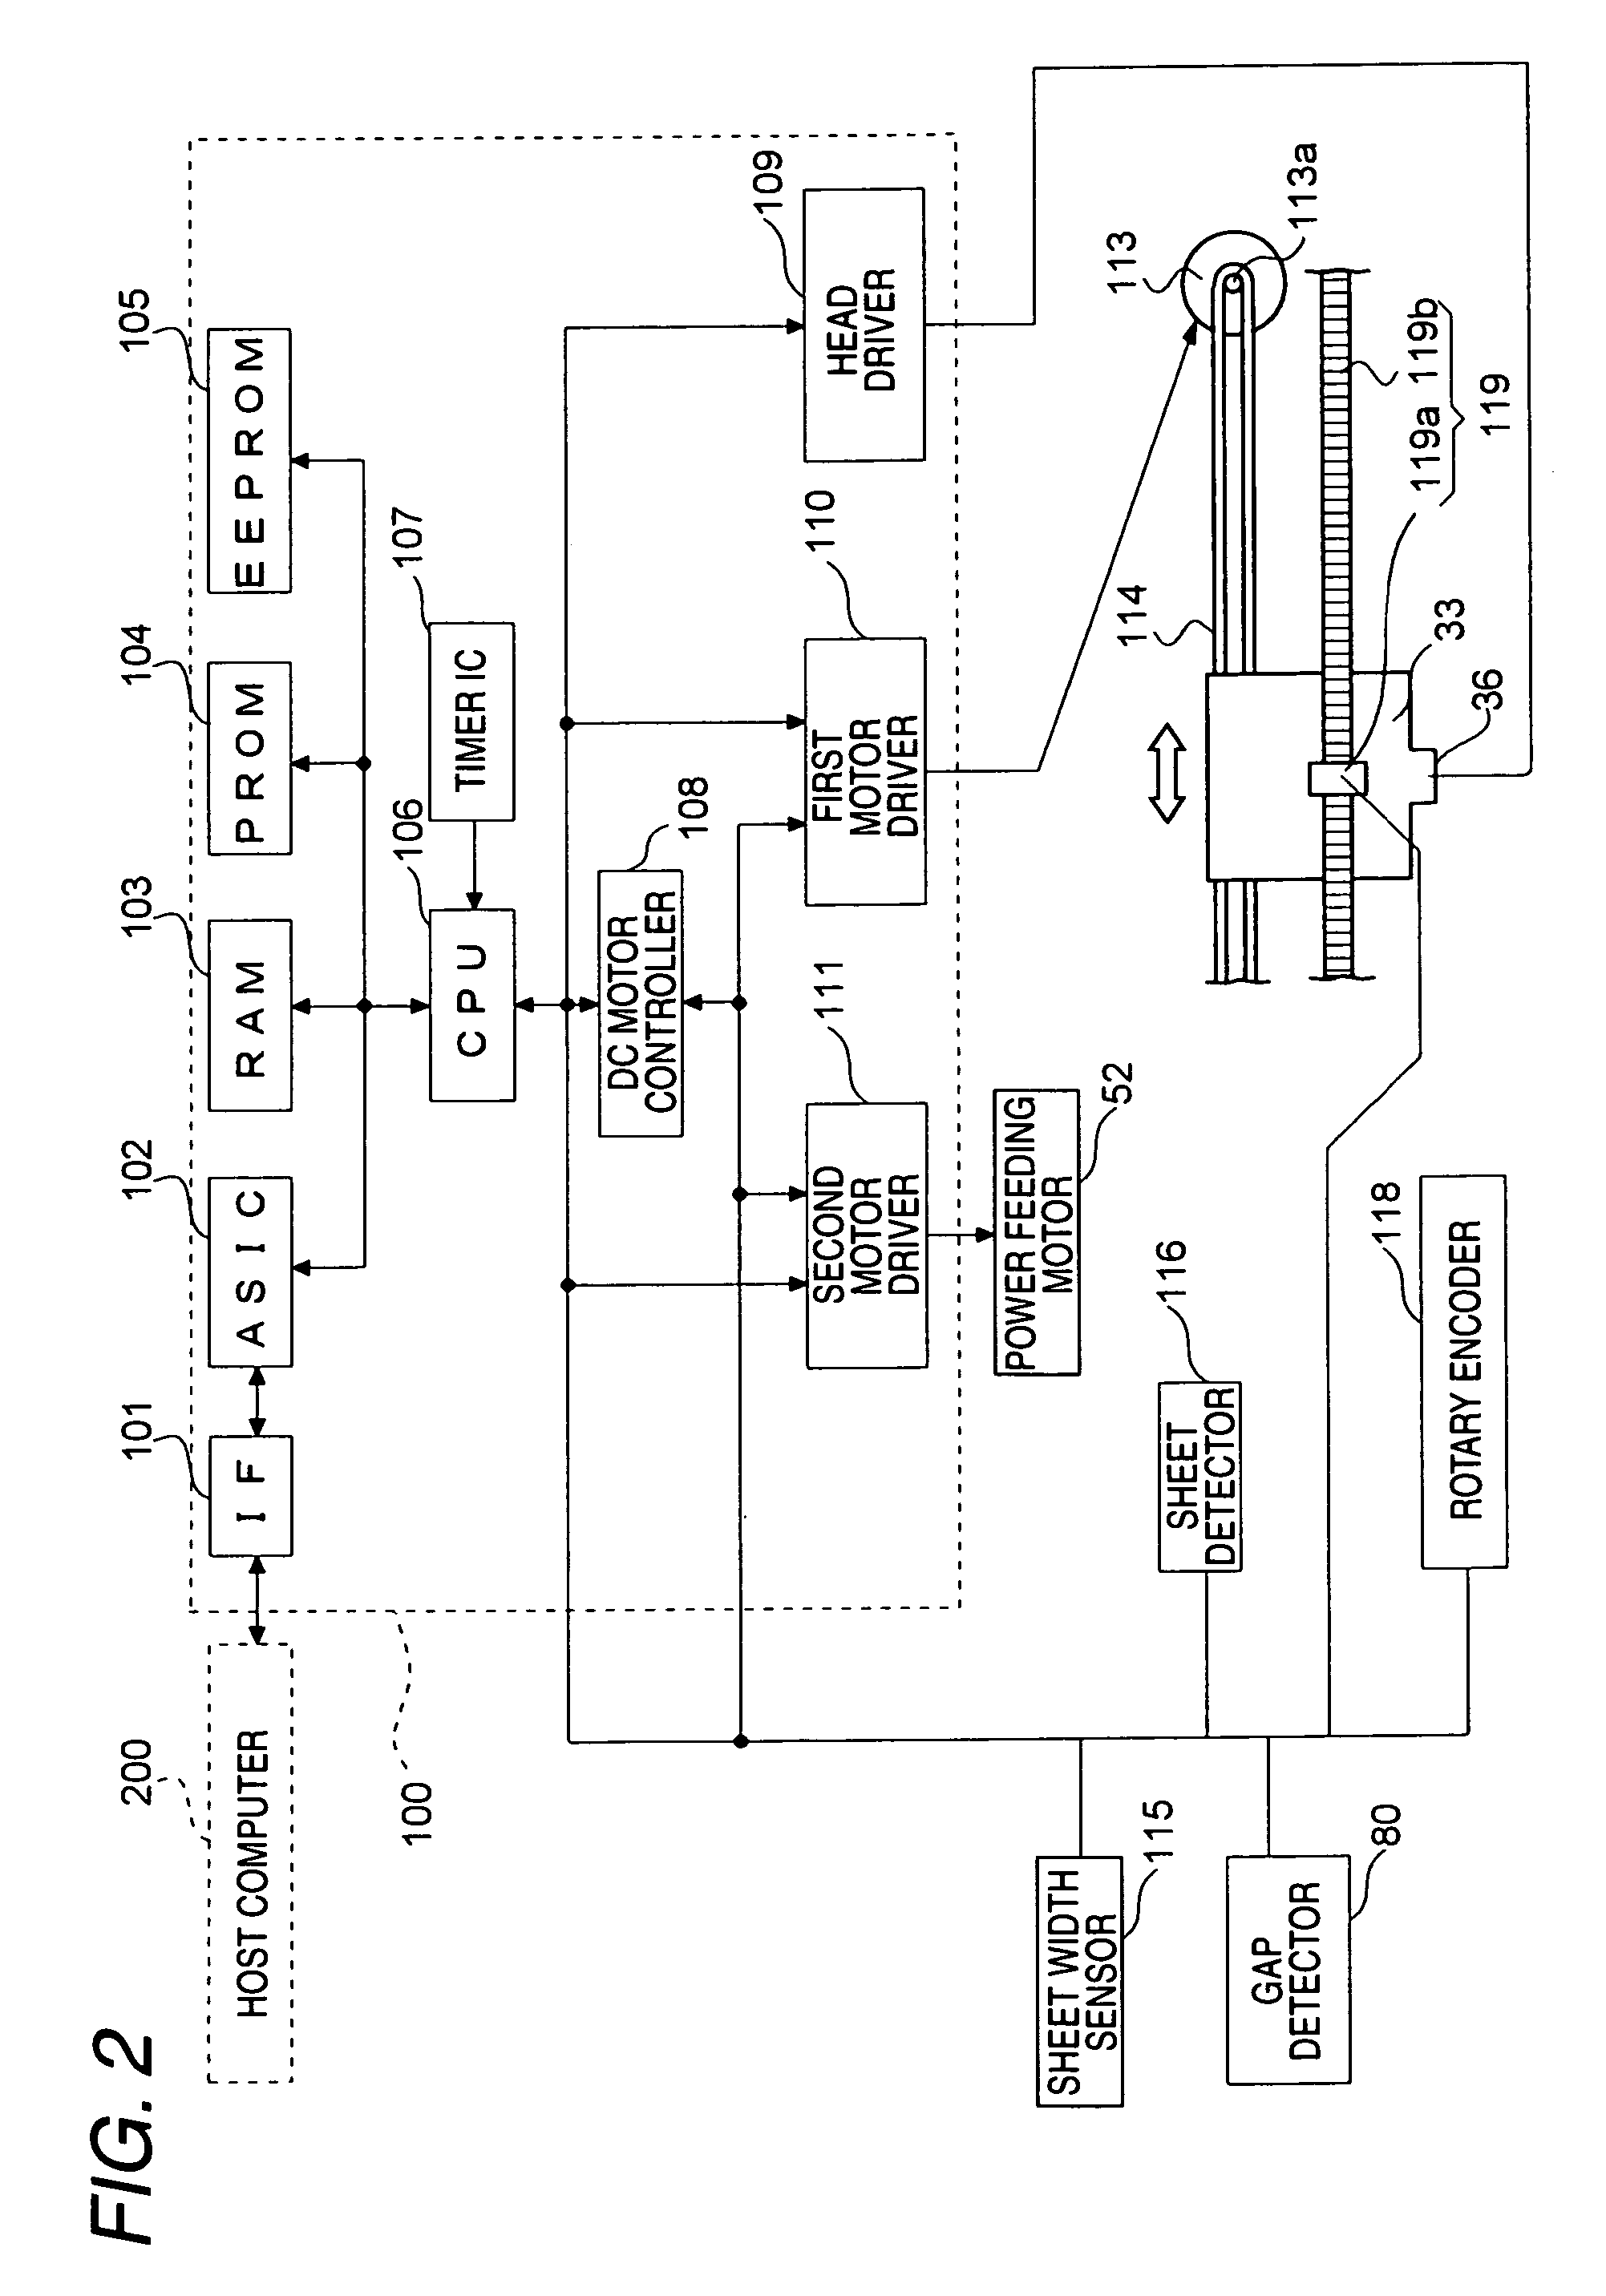 Gap detector, liquid ejecting apparatus incorporating the same, and gap detecting method executed in the apparatus